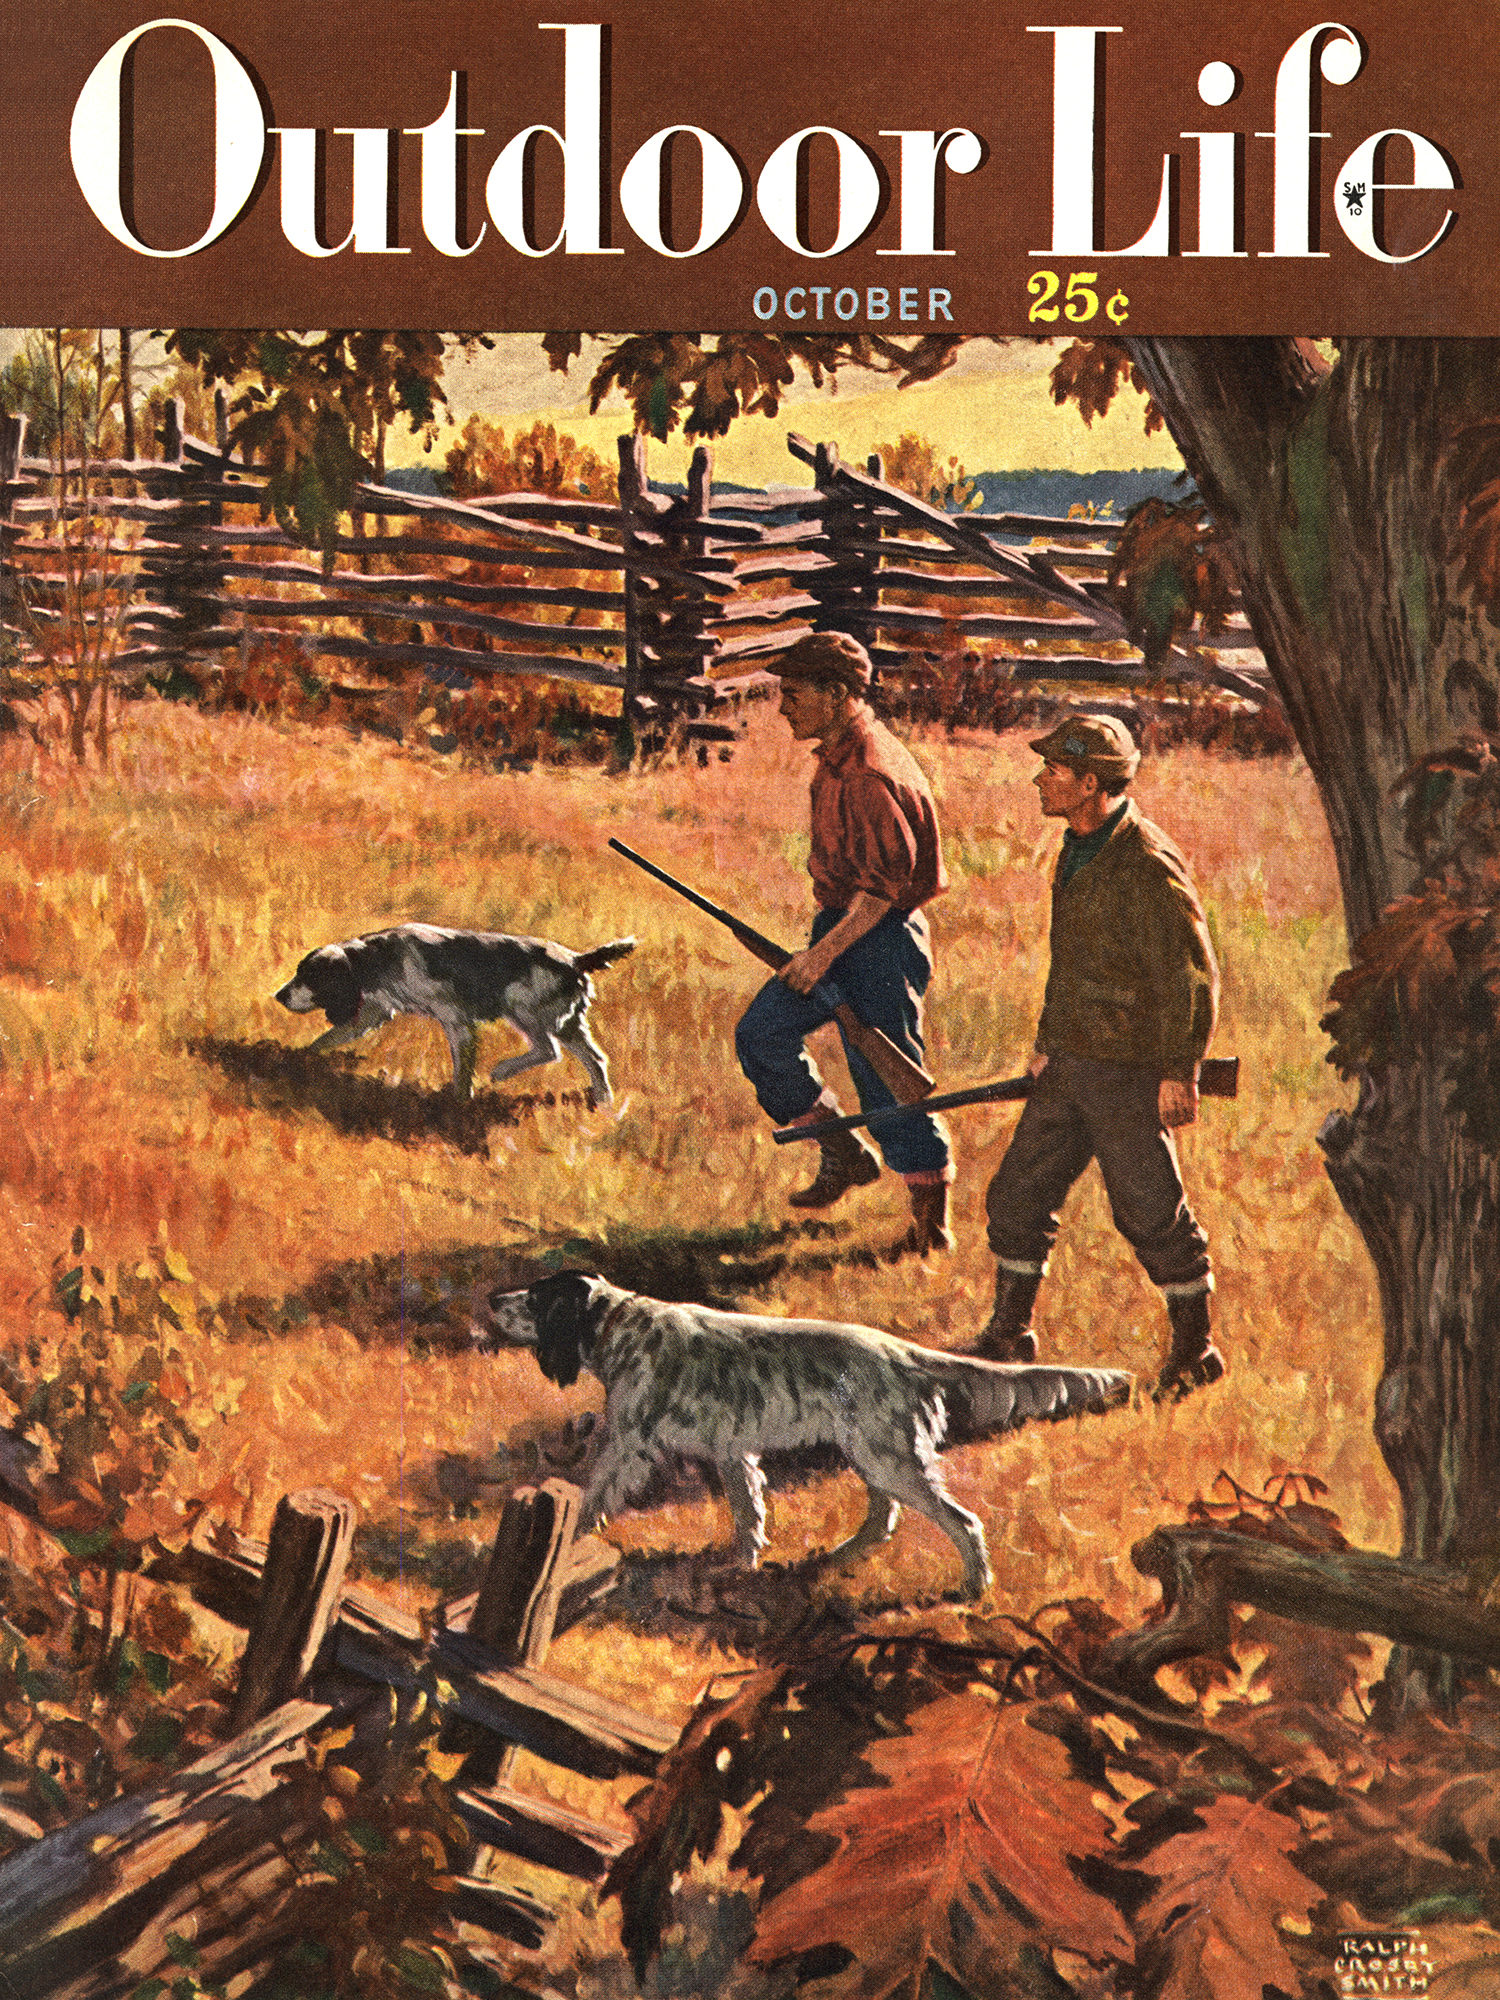 October 1949: Of all the bird dog breeds, setters appeared most often in the first 50 years of OL covers.